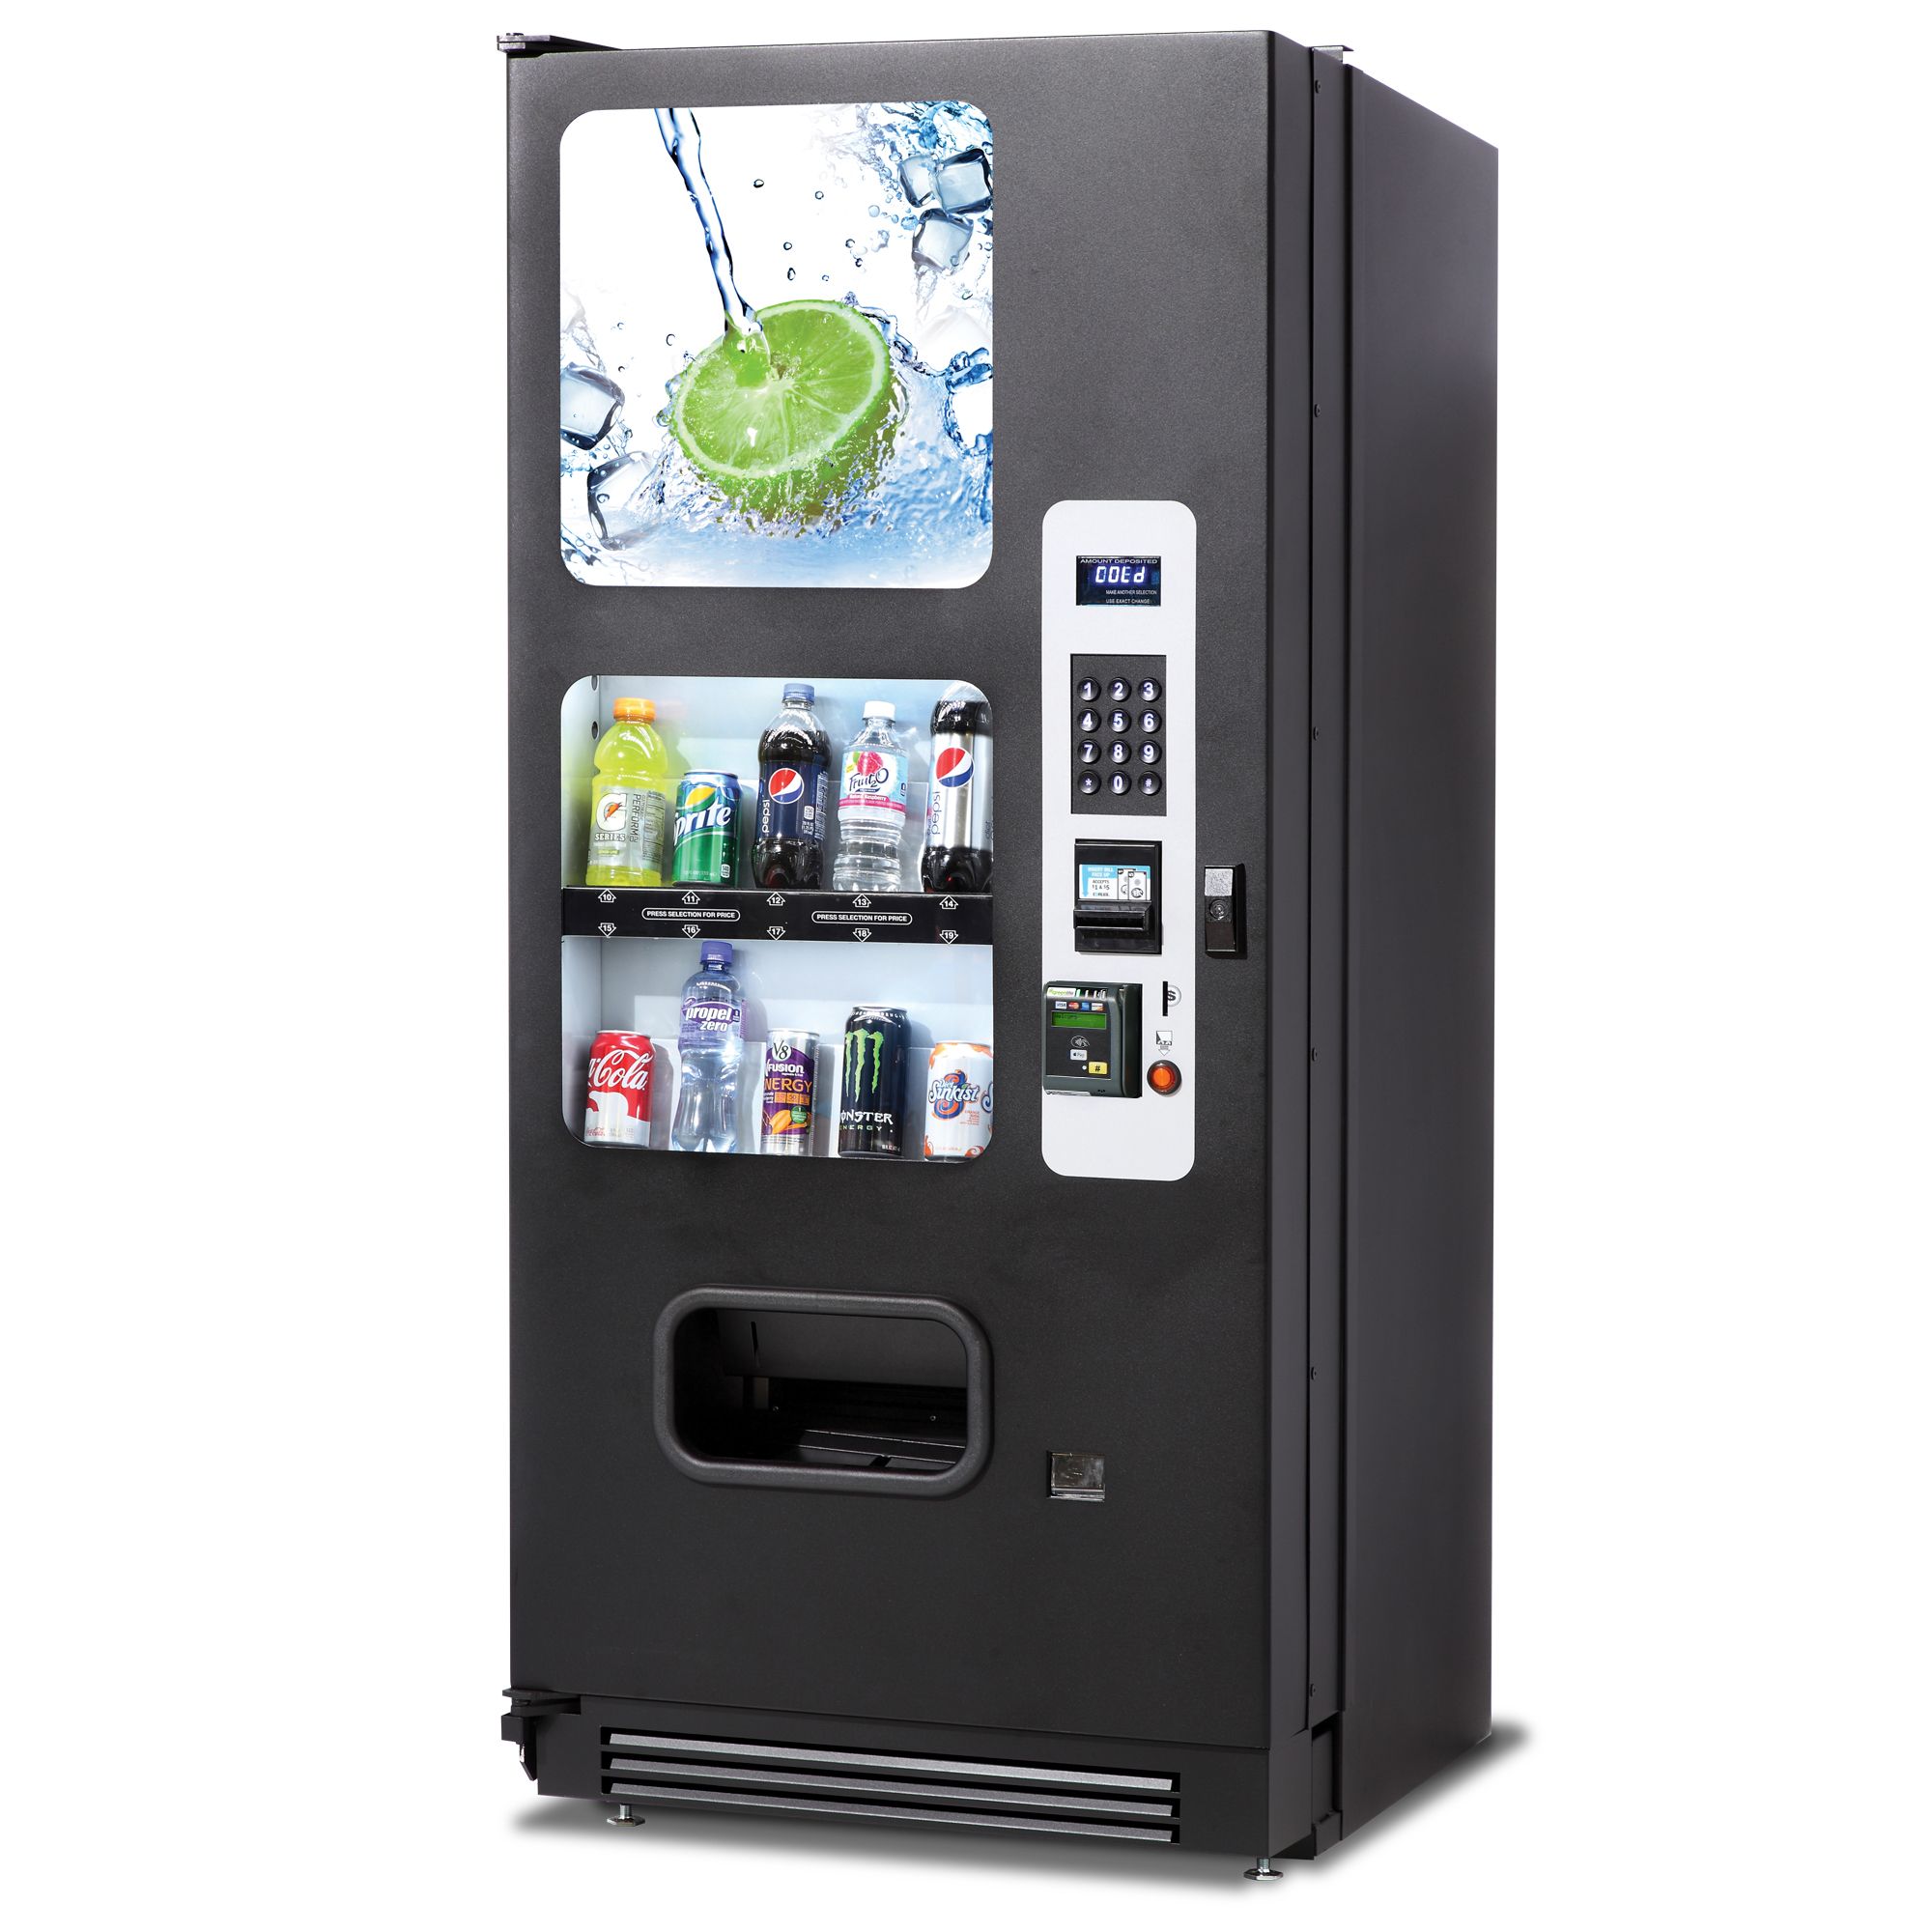 Selectivend SV 9-20 Snack and Beverage Vending Machine with Credit Card  Reader